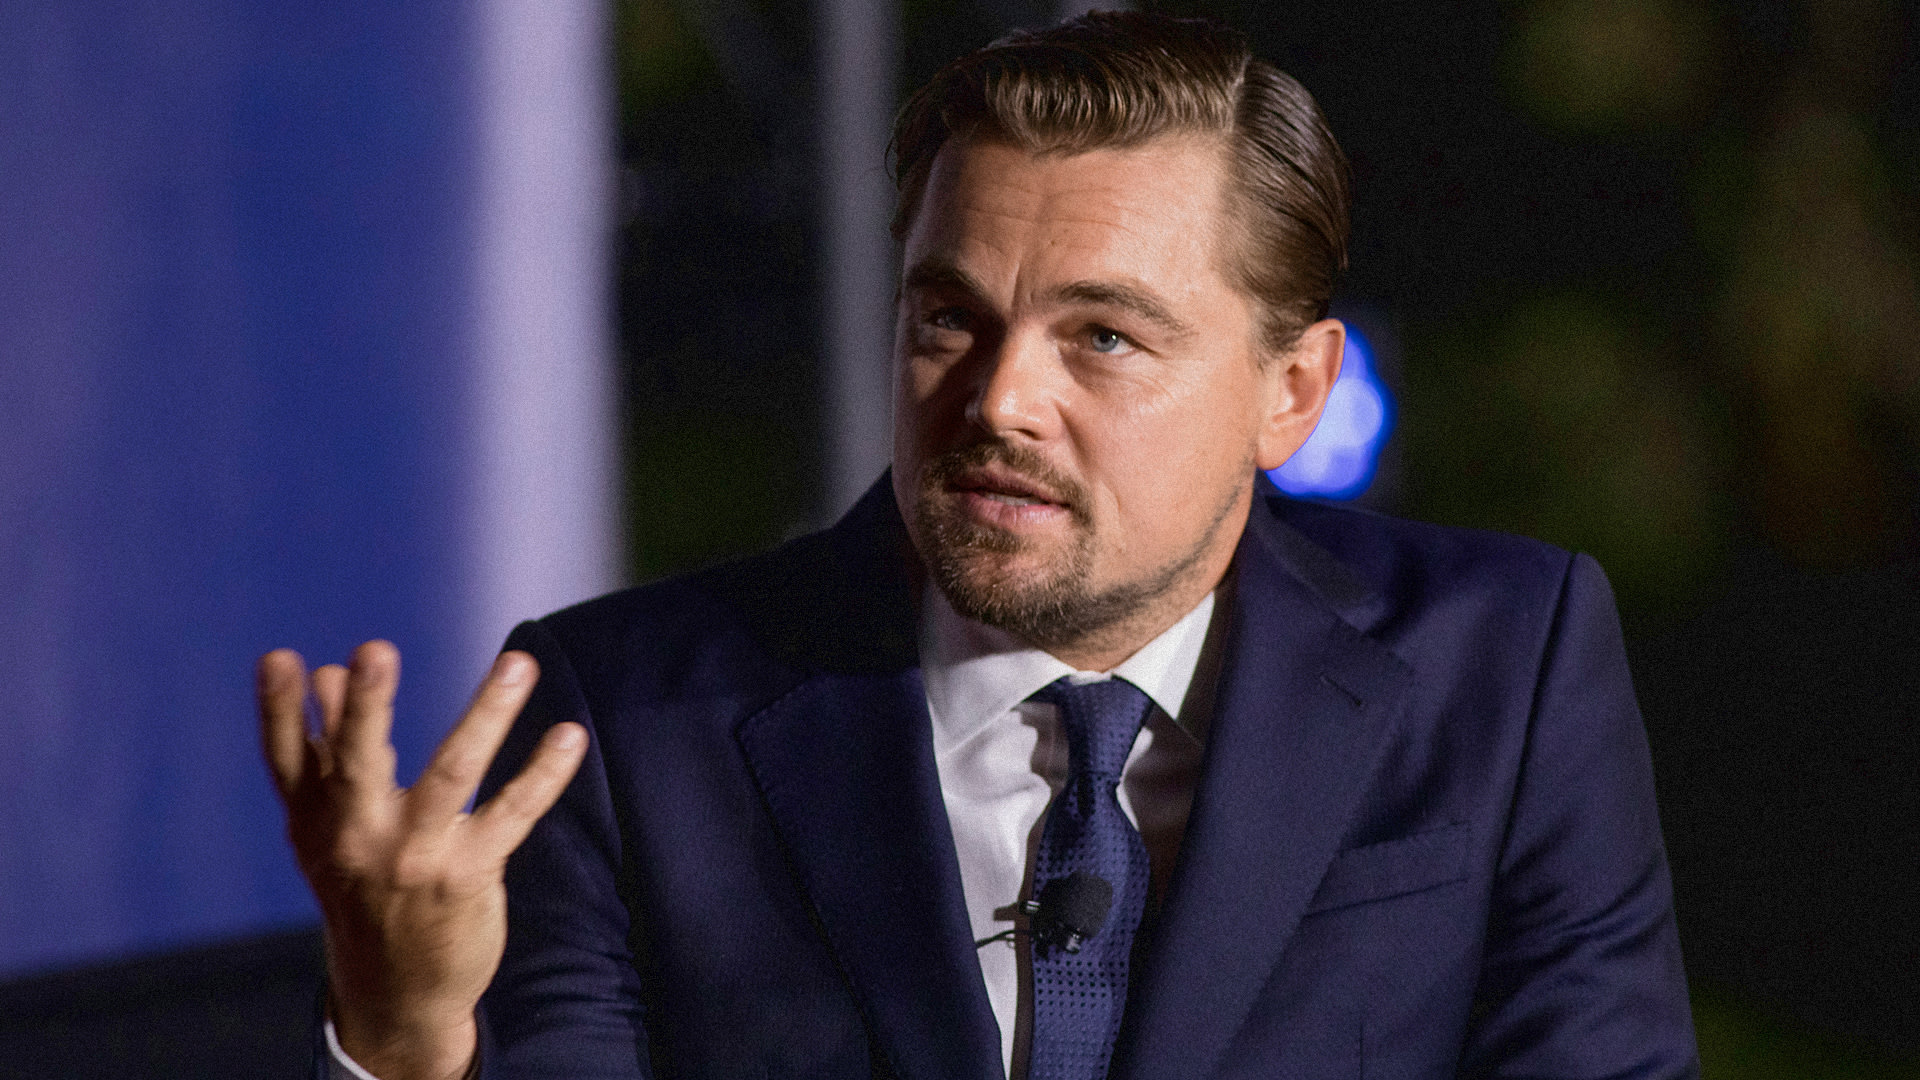 Leonardo DiCaprio’s foundation just announced a bold new plan to curb climate change